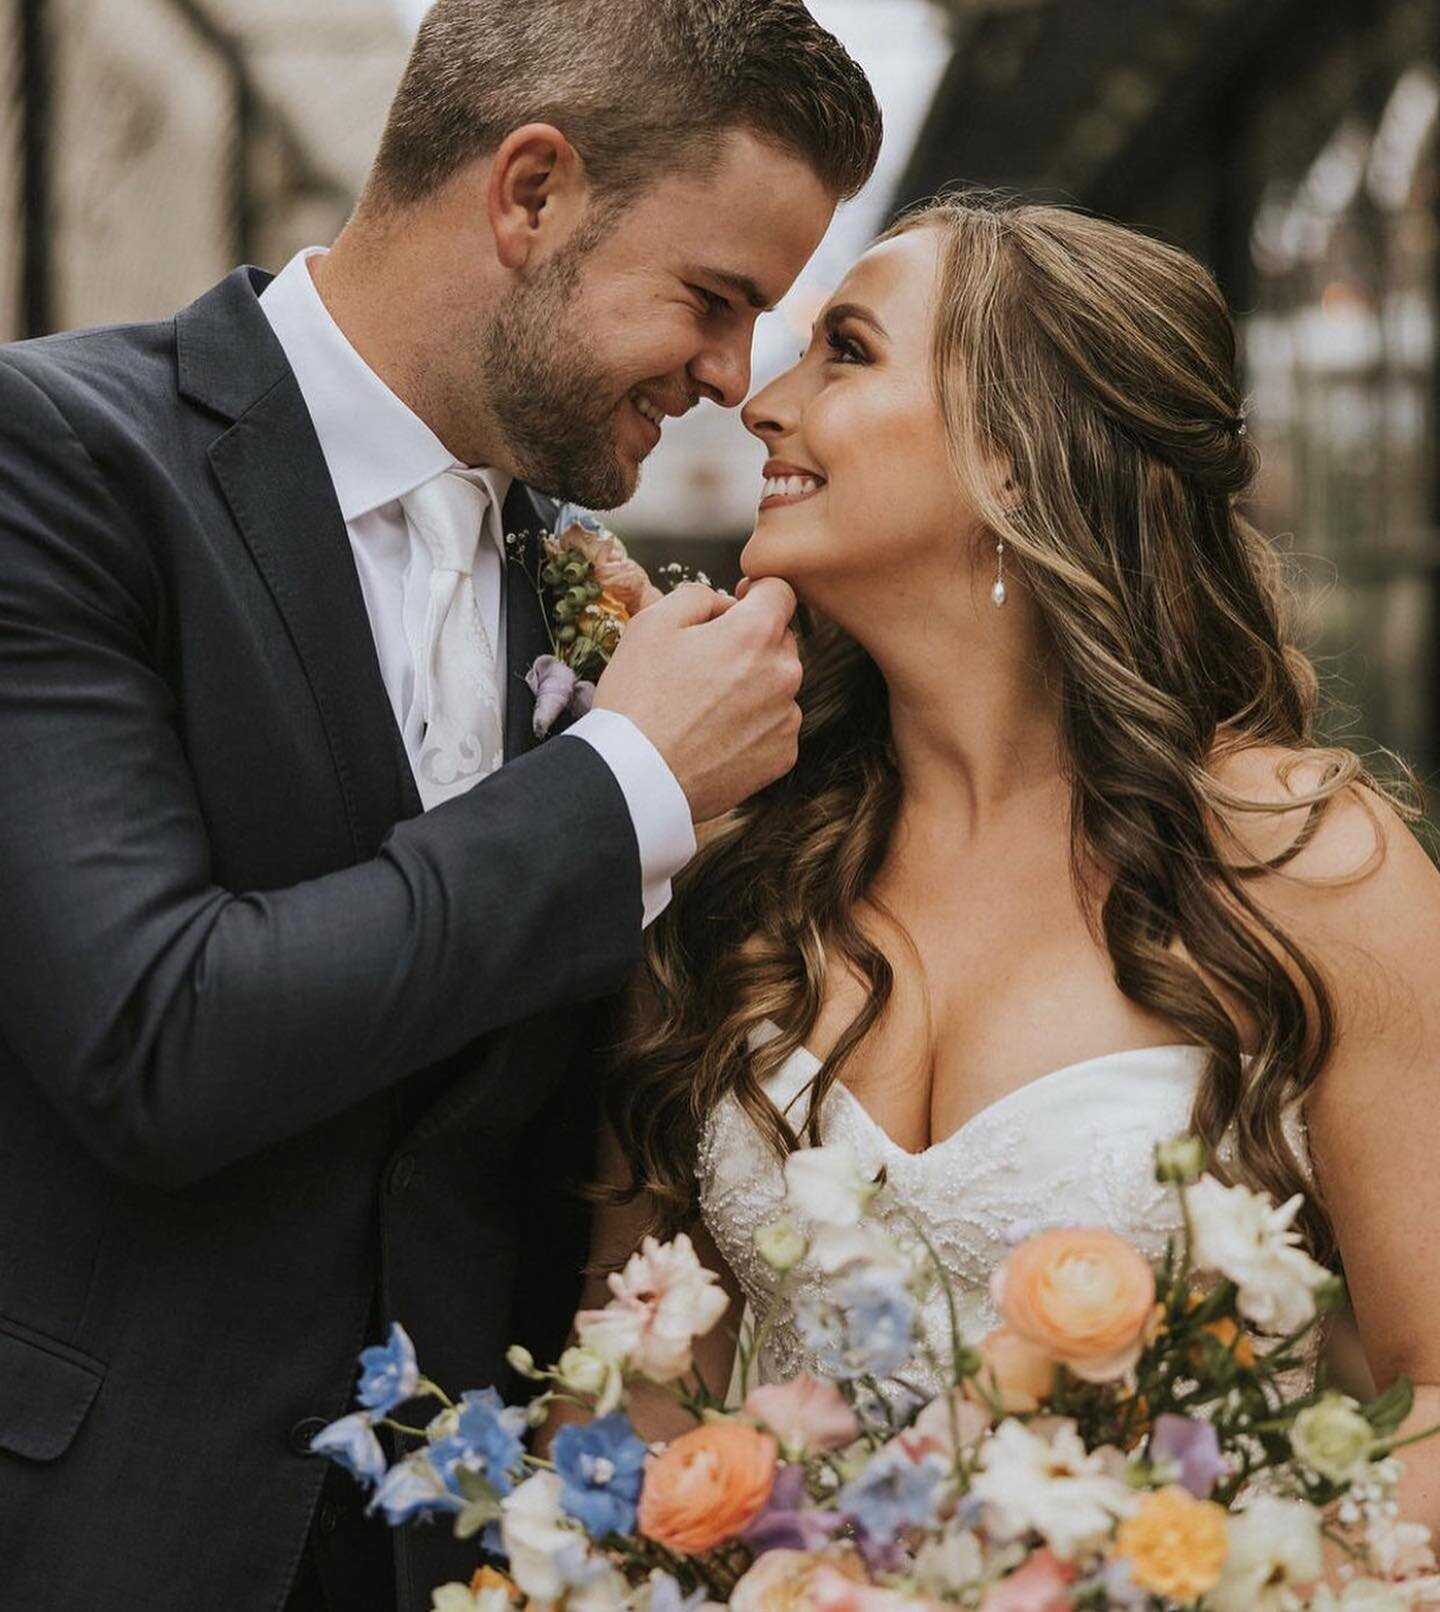 Safe to say we&rsquo;re a little (ok, a lot!) obsessed with this soft and modern glam look on our gorgeous bride 😍 
Hair and makeup by #OffwhiteNicole 

Photographer: @valenleephotography 
Planner: @meganwithclutchevents 
Florist: @goldenrodfloral 
